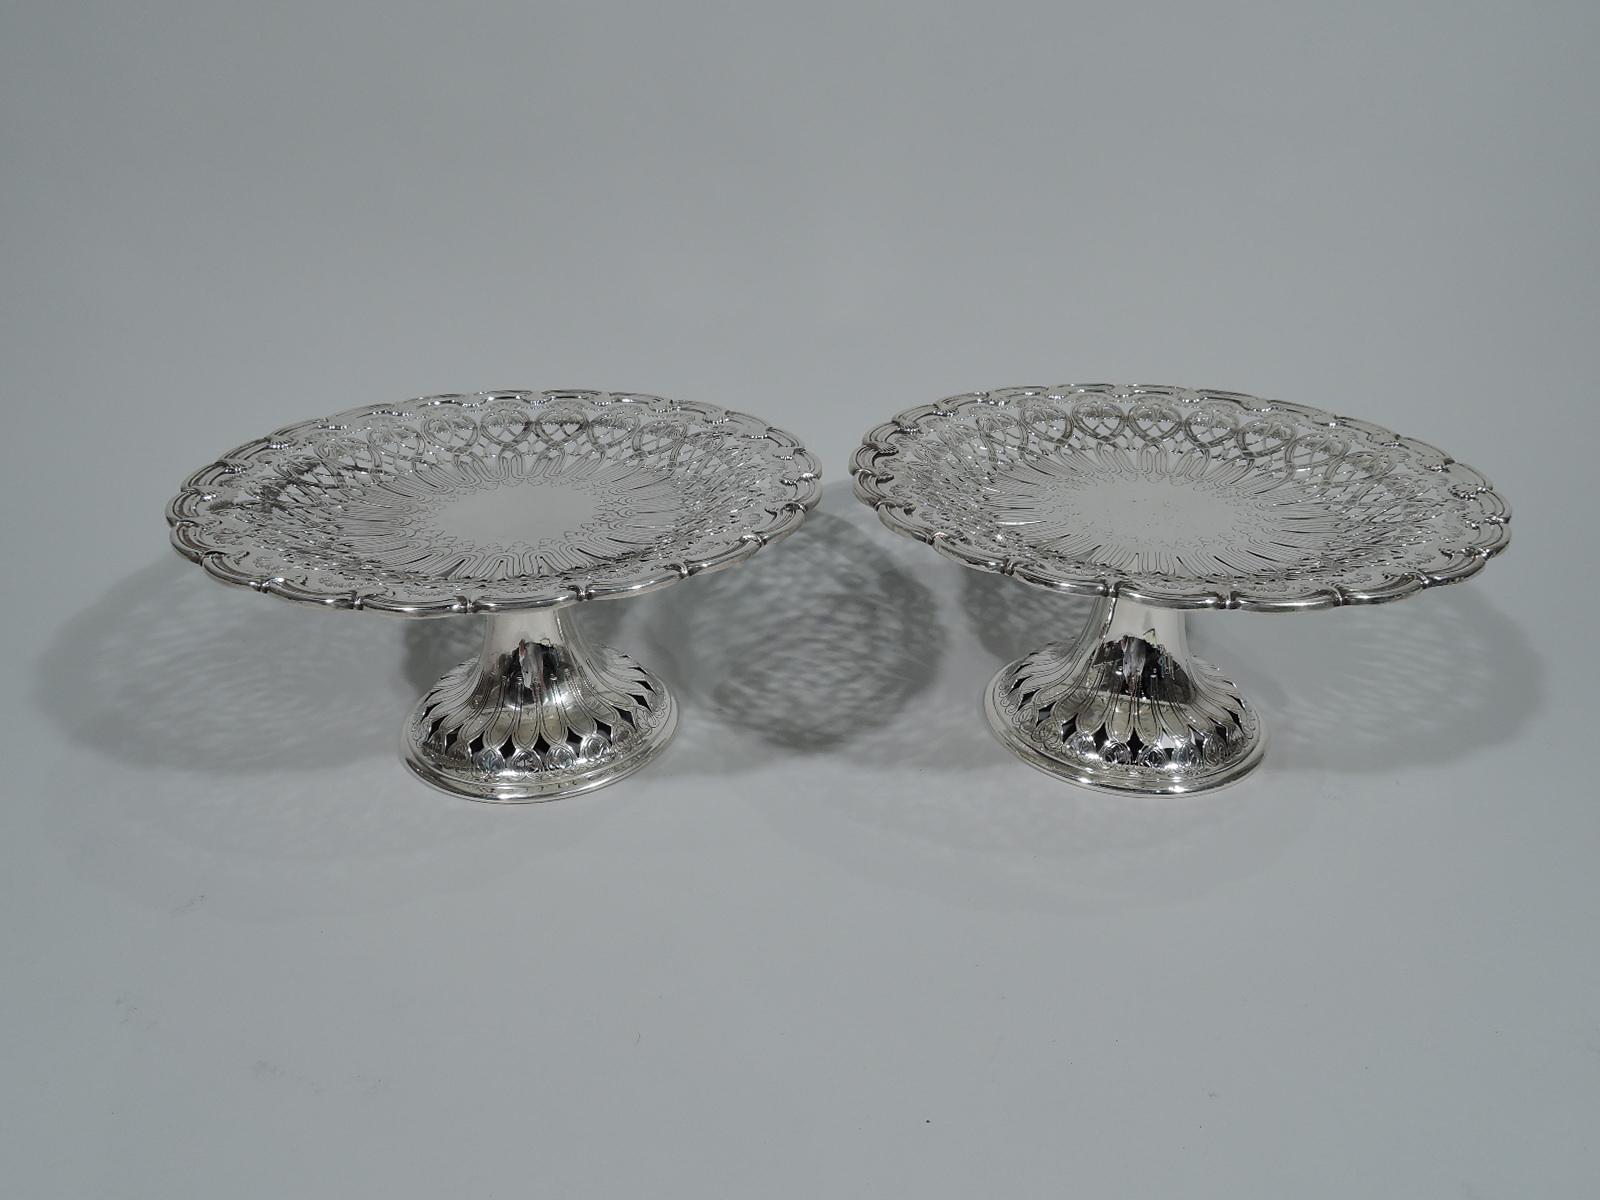 Pair of Edwardian Art Nouveau sterling silver compotes. Made by Tiffany & Co. in New York, circa 1907. Each: Round and shallow bowl on upward tapering shaft flowing into raised foot. Well center solid with engraved leaves and tendrils surrounded by